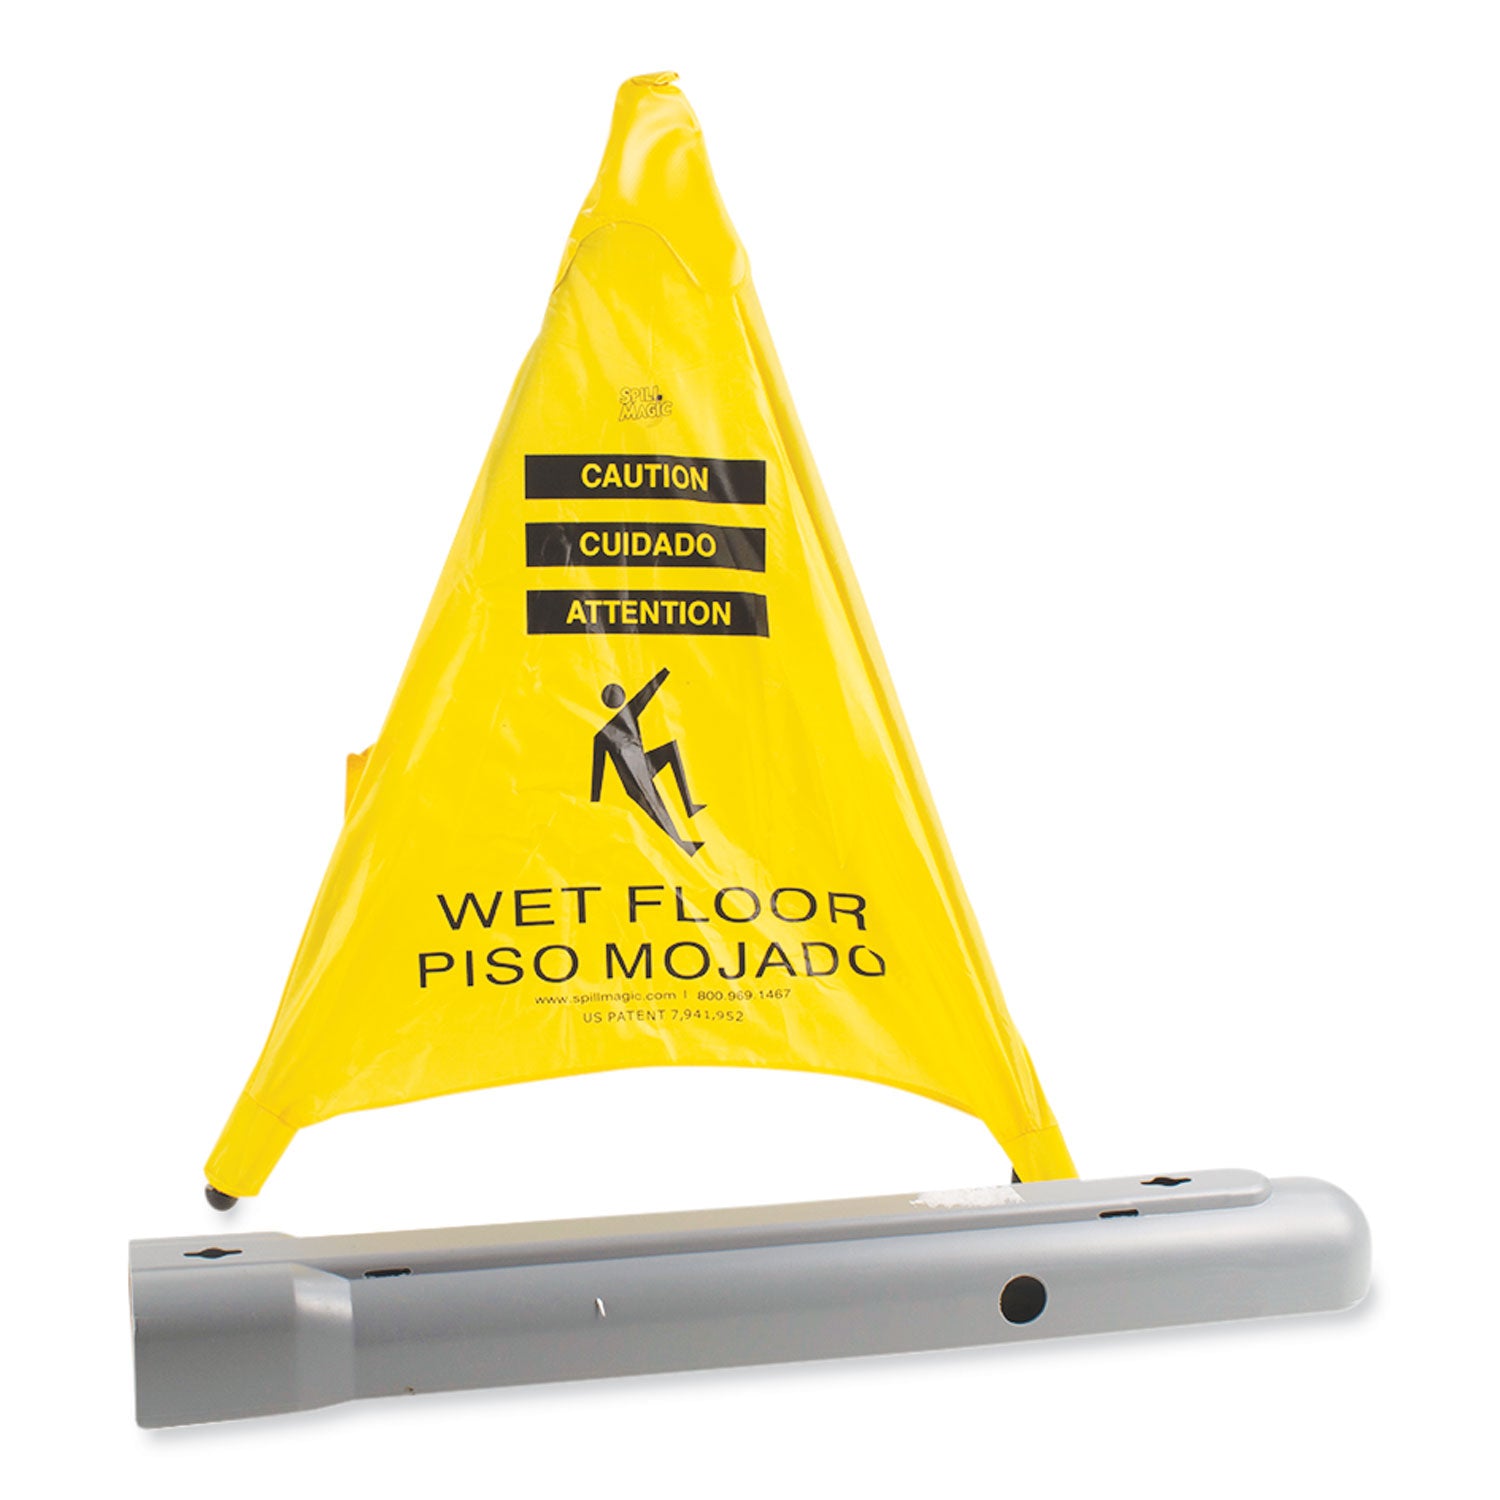 pop-up-safety-cone-3-x-25-x-20-yellow_fao220sc - 3